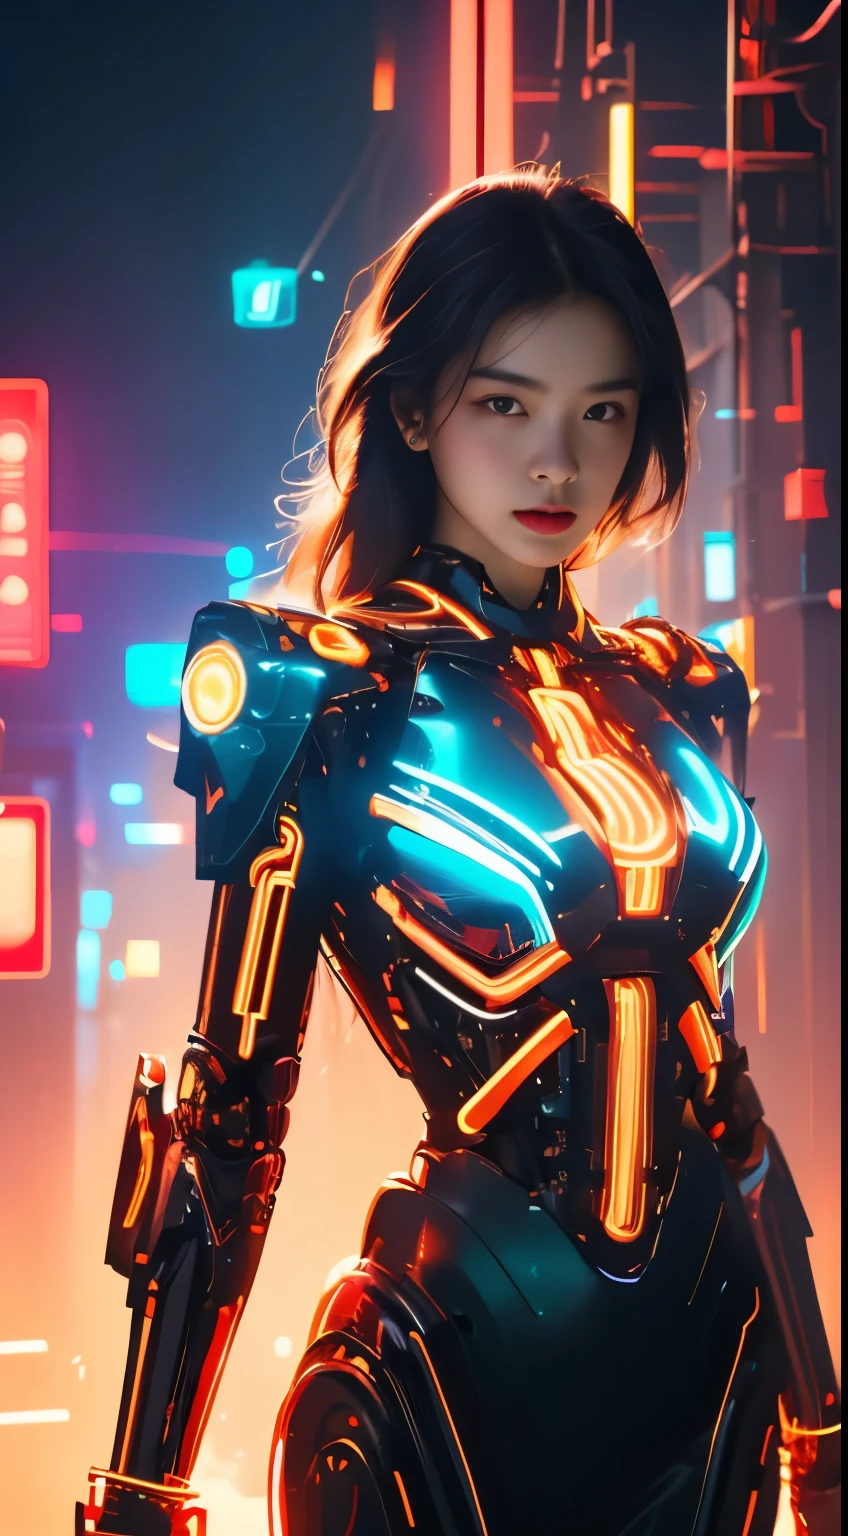 
Virtual image,Realistic 8K images,hips up,Masterpiece,Complete Anatomy,Complete dynamic composition,Light hits the front,woman 1,alone,ผมยาวสีน้ำตาลgold,robot,complex machinery,Machines of the future world,Machinery with colorful neon lights,There is a bright neon light on the figure&#39;s chest.,Very bright,red machine metallic-white_ titeneim,orange_gold_metal,,,Abstract city background at night
